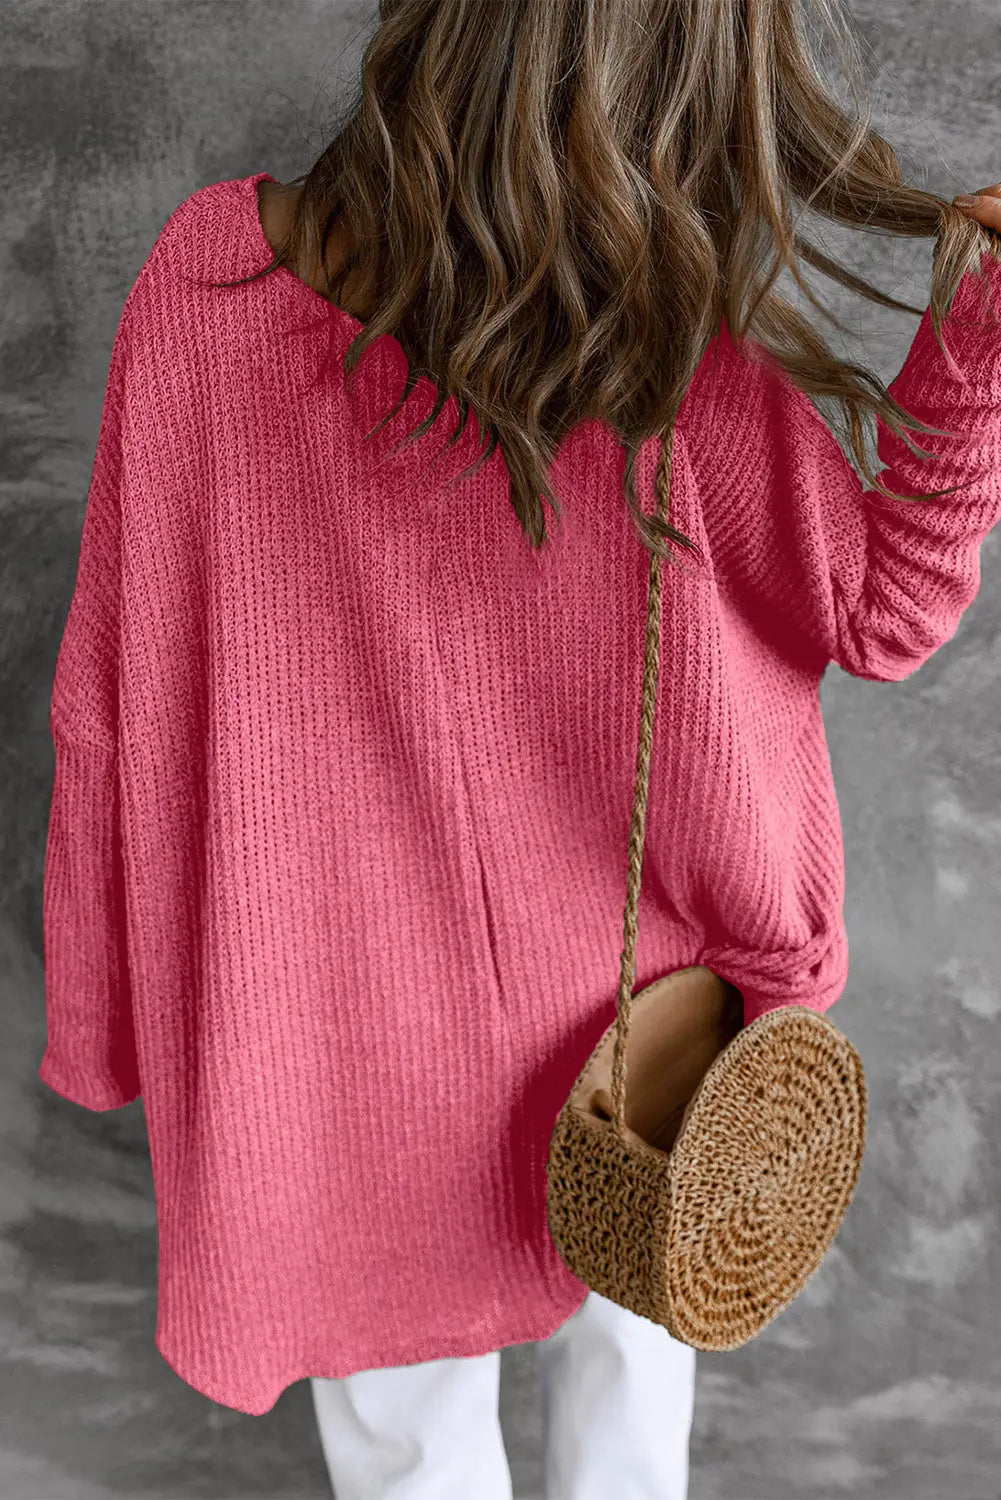 Pirouette slouchy dolman sleeve high low sweater - & cardigans